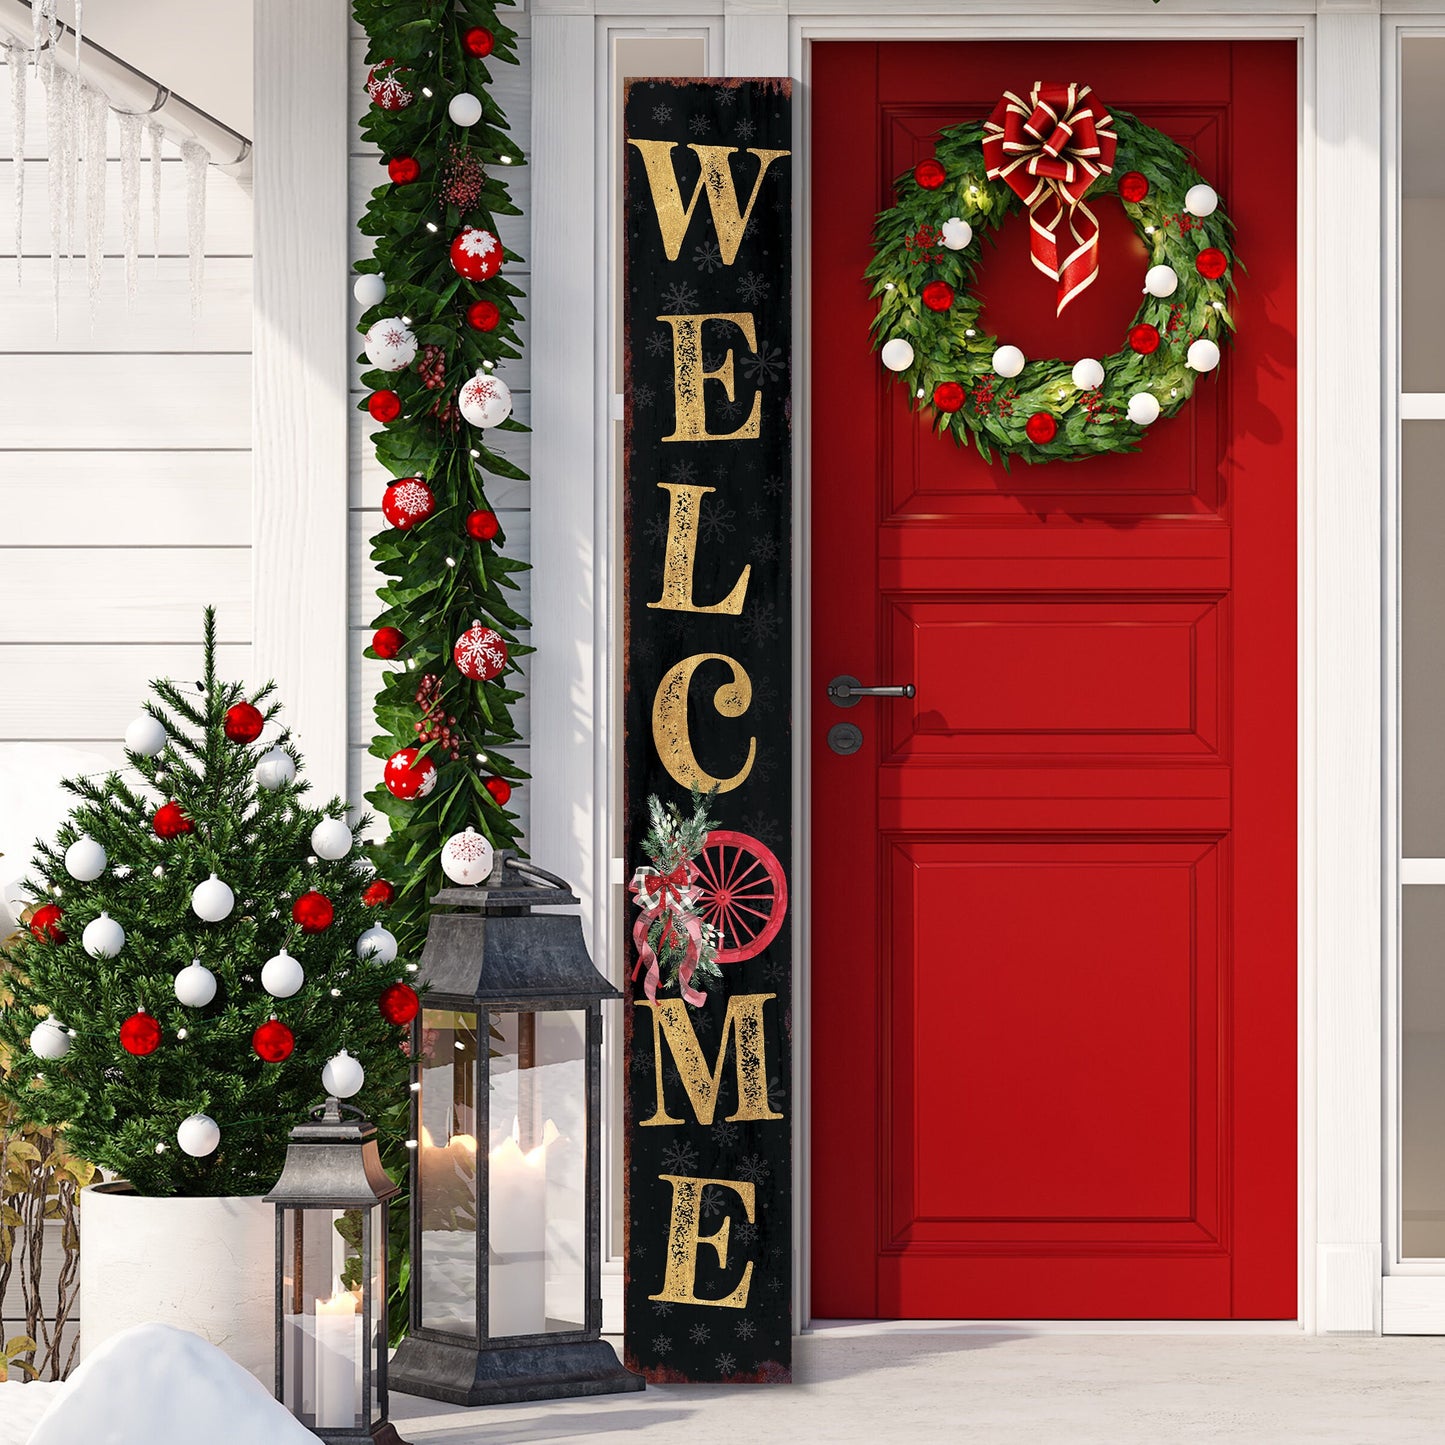 72in Welcome with Wagon Wheel Wreath Christmas Porch Sign - Front Porch Welcome Sign Home Decor, Vintage Holiday Christmas Decor for Outdoor